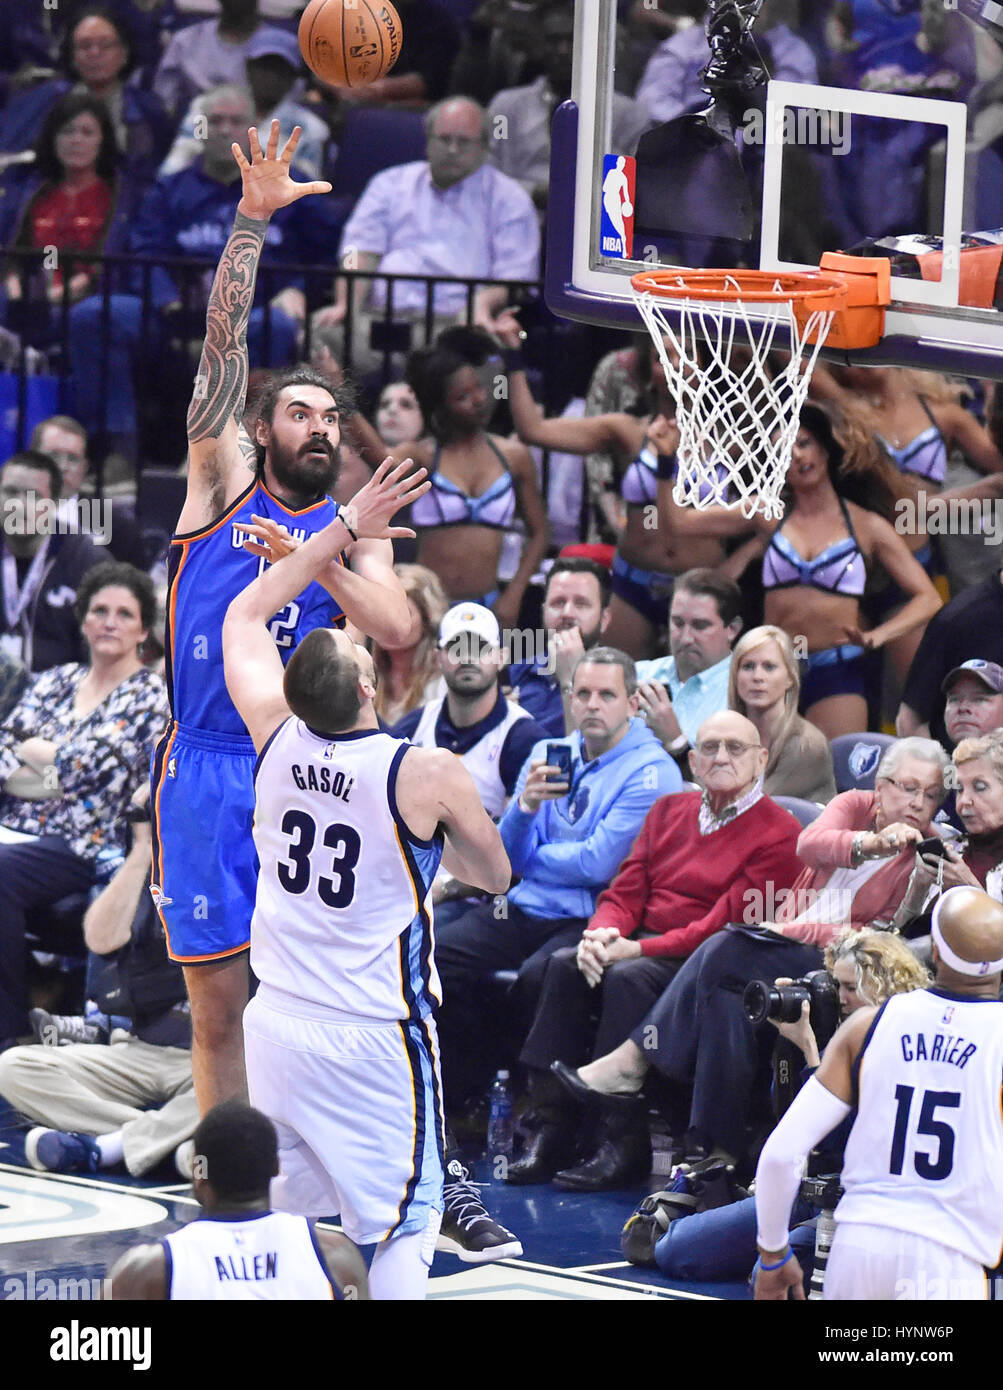 Memphis, TN, USA. 5th Apr, 2017. Oklahoma City Thunder Steven Adams (left) takes a shot over a Memphis Grizzlies defender during the second quarter of an NBA game at FedEx Forum in Memphis, TN. Oklahoma City won 103-100. Austin McAfee/CSM/Alamy Live News Stock Photo